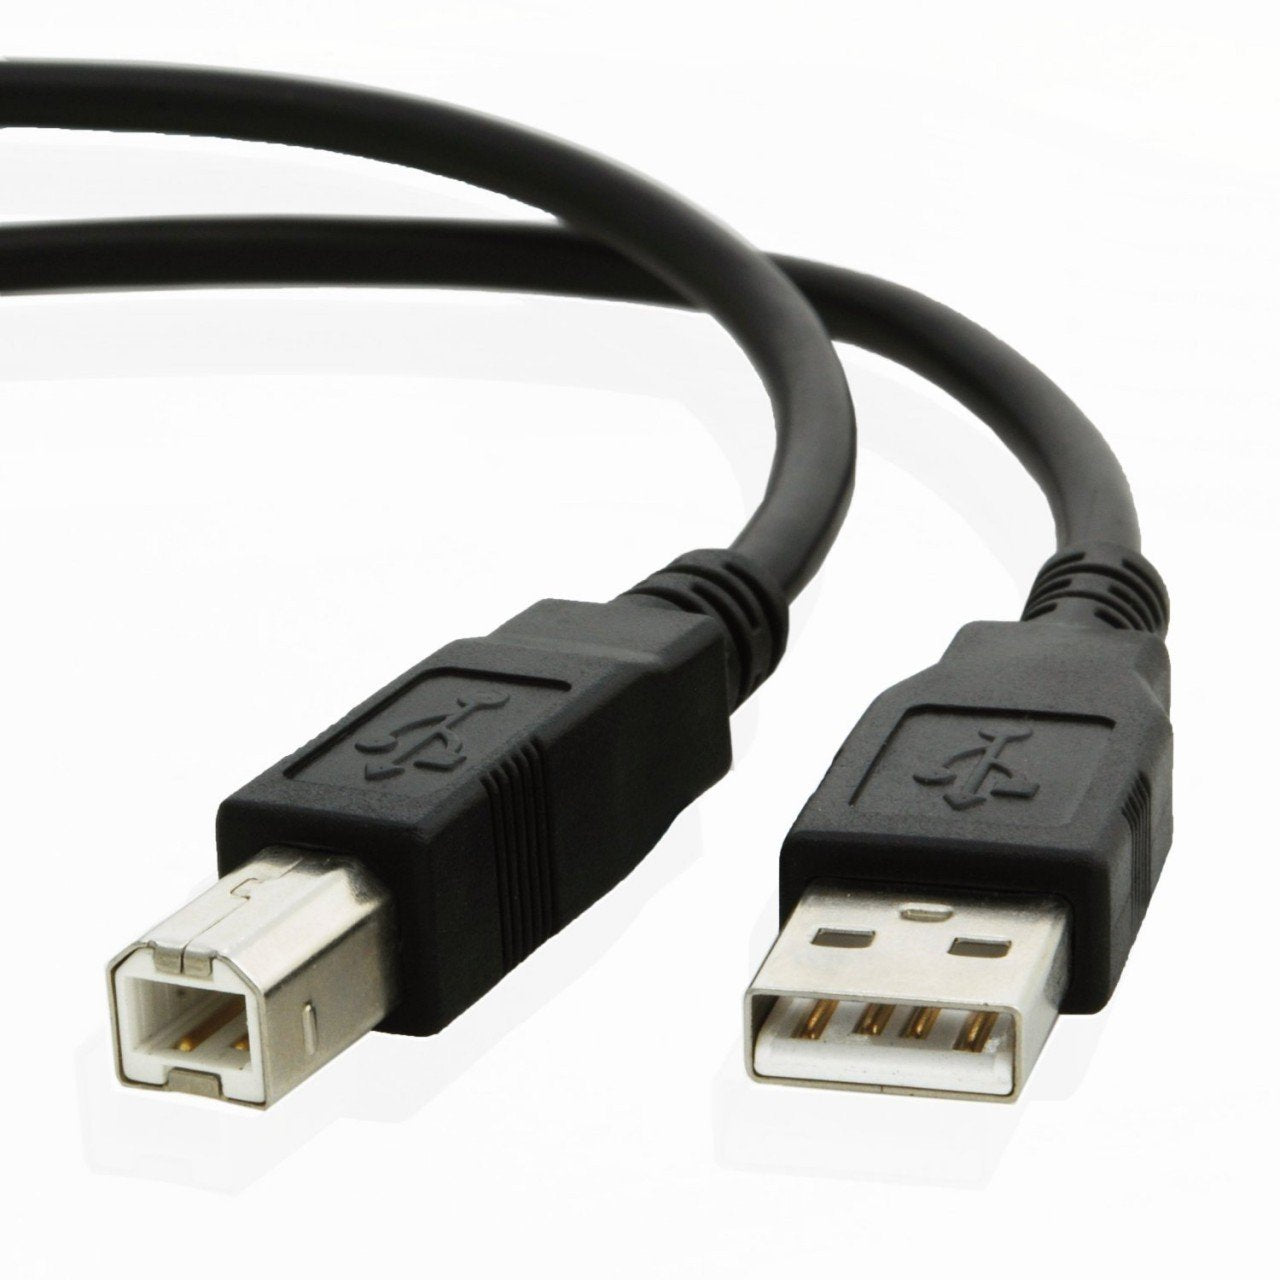 USB cable for Brother MFC-J5330DW